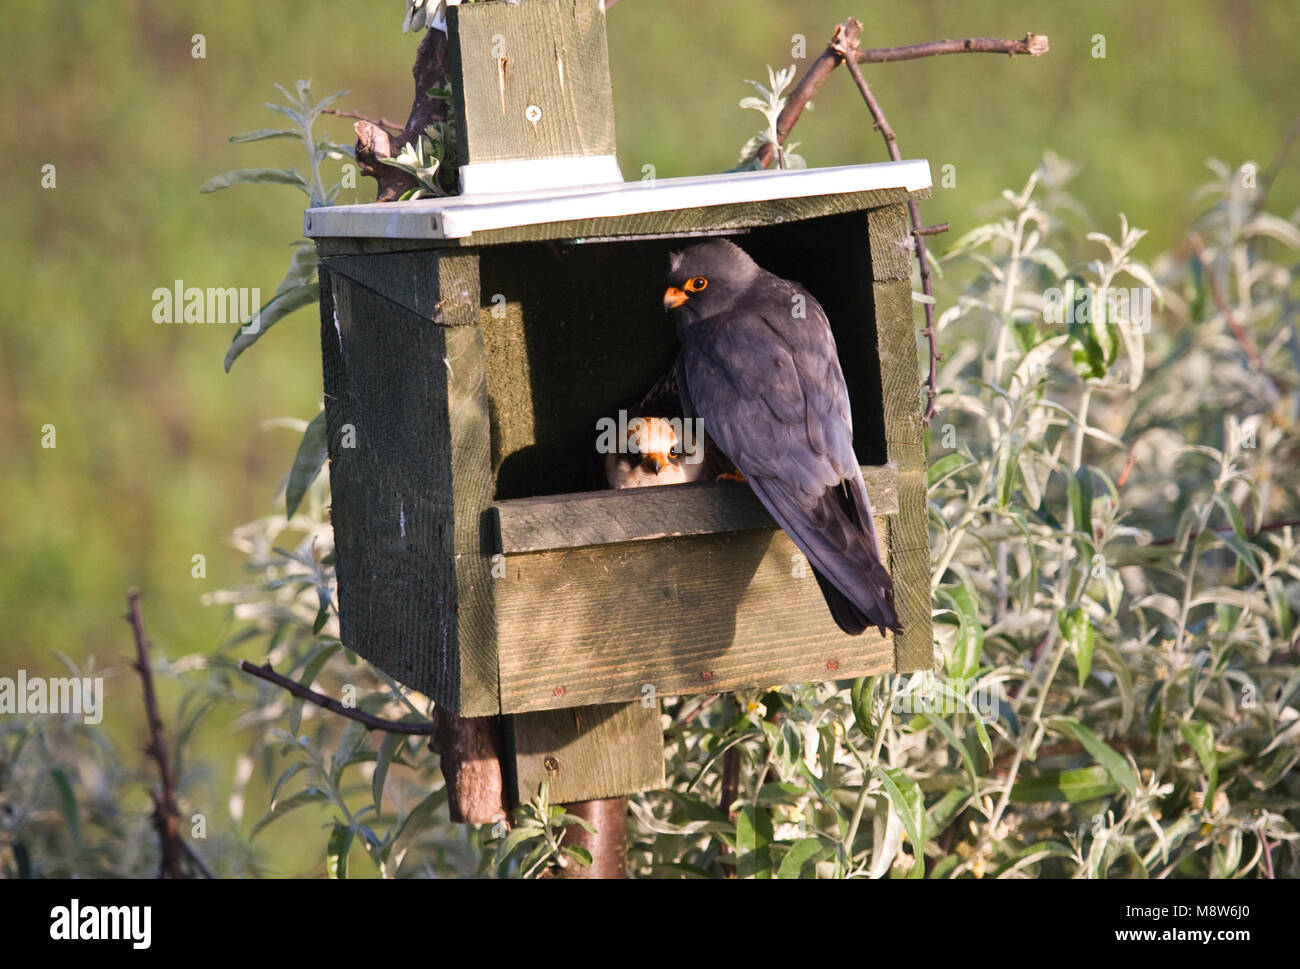 Roodpootvalk broedend in nestkast; Red-footed Falcons breeding in nest box Stock Photo